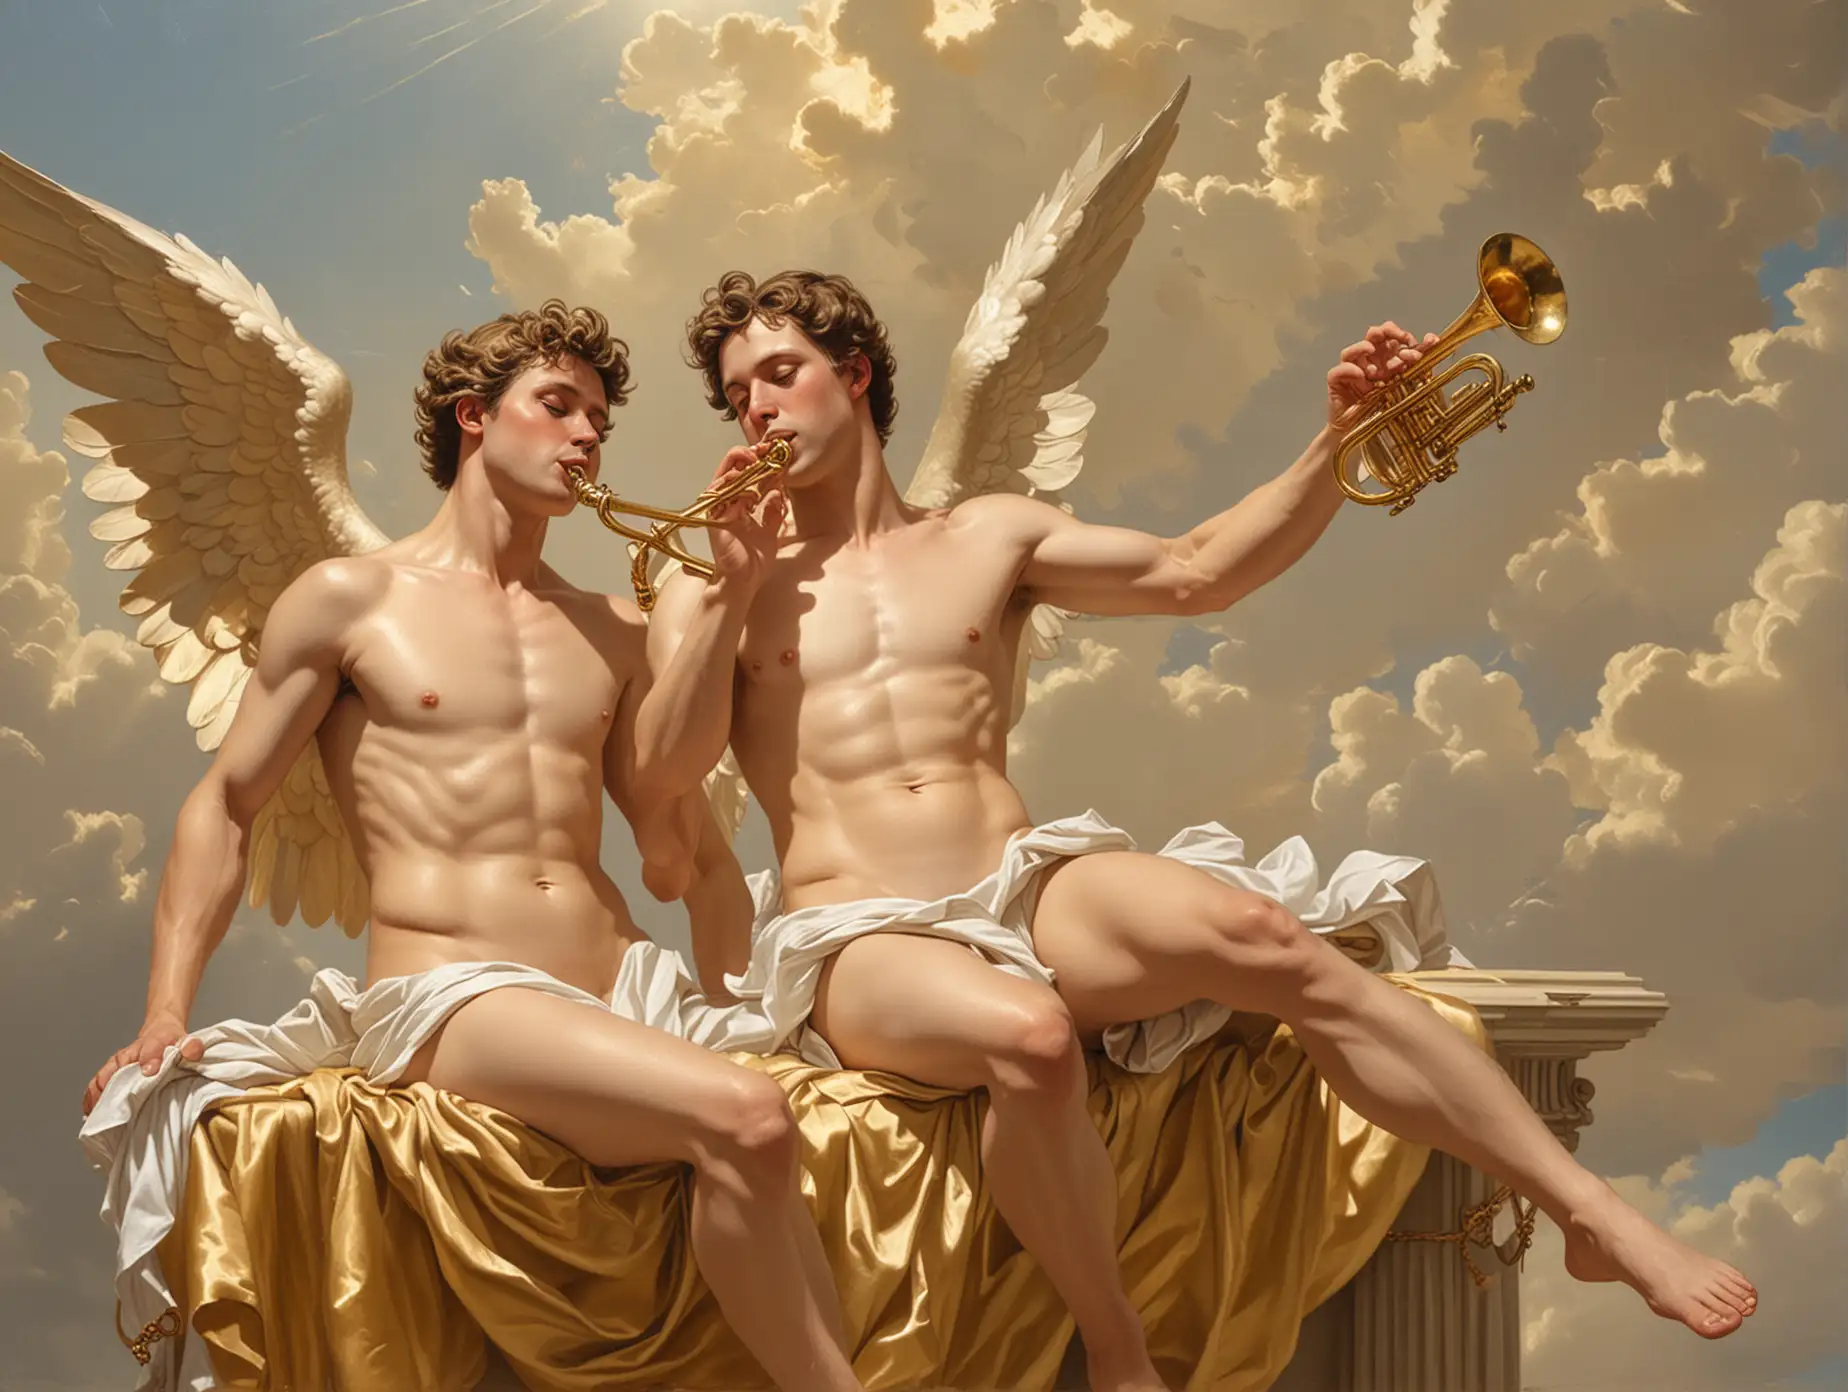 a painting of 2 sitting naked adult male angels with folded wings and wearing a white mantel over a gold dress and no sandals playing a trumpet in the style of Italian artist Vittorio Reggianini.  The setting is a sunlight sky